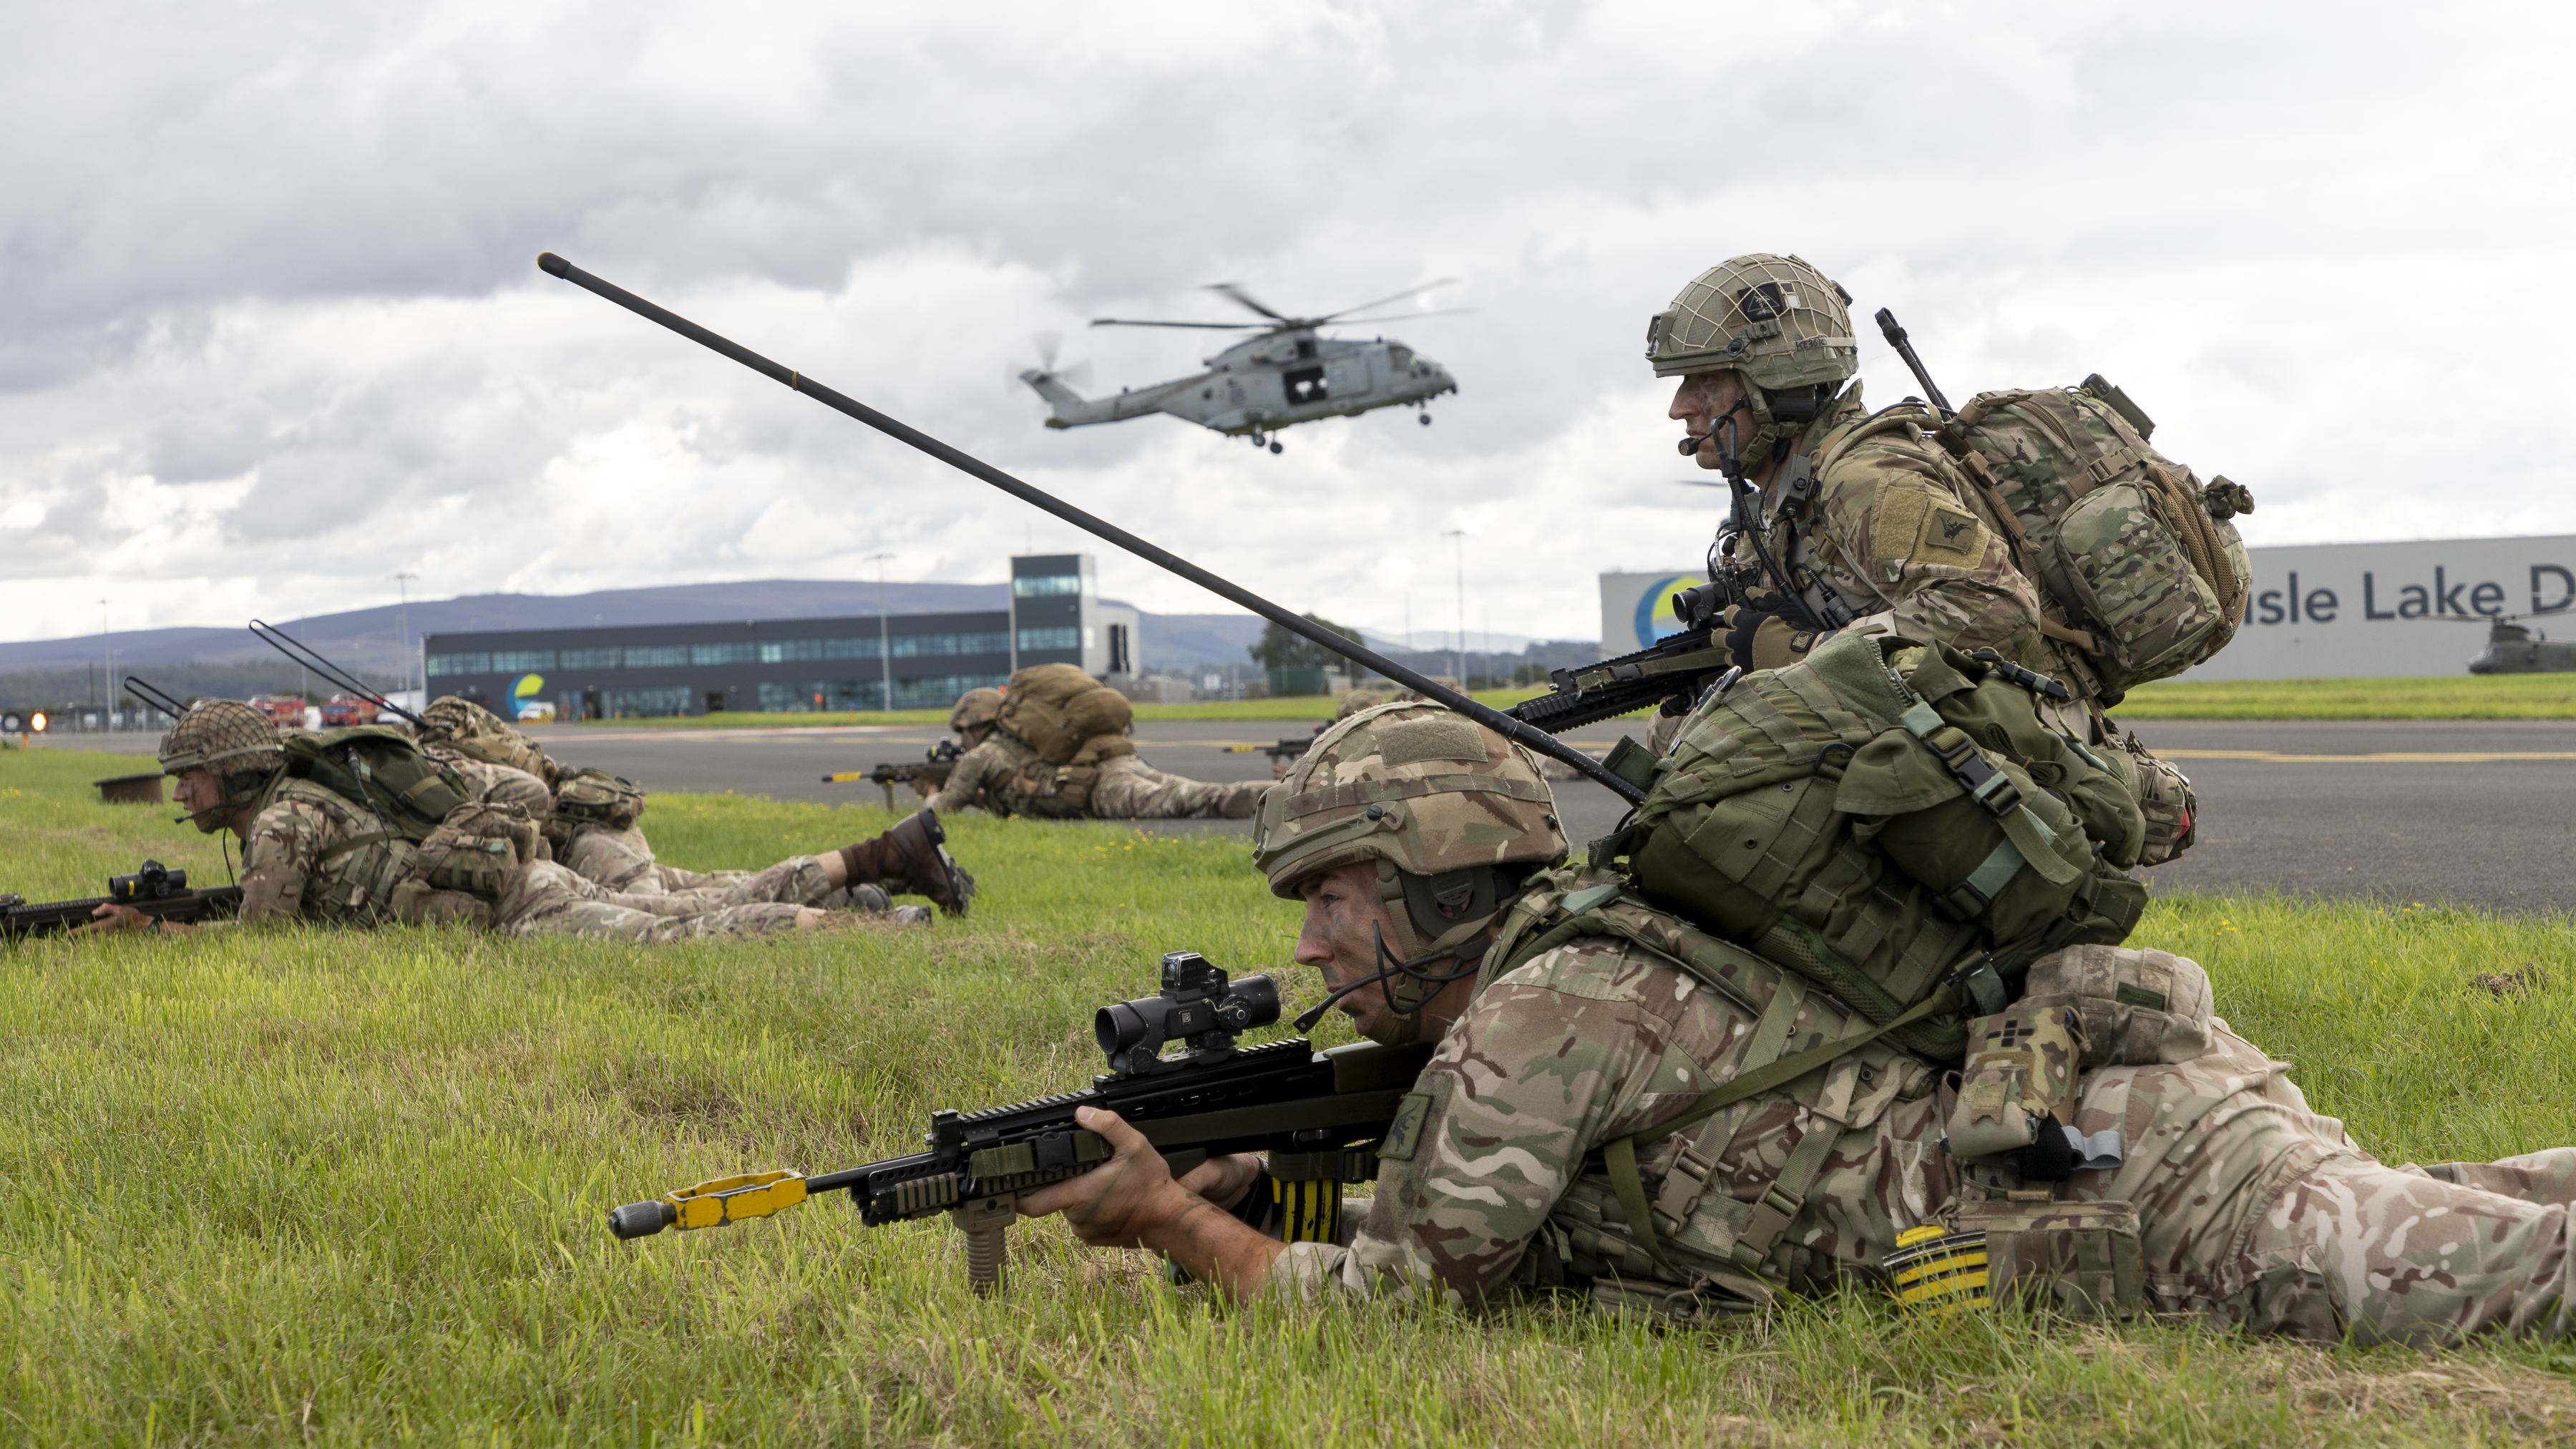 Image shows RAF personnel with rifles, moving in prone on an airfield.